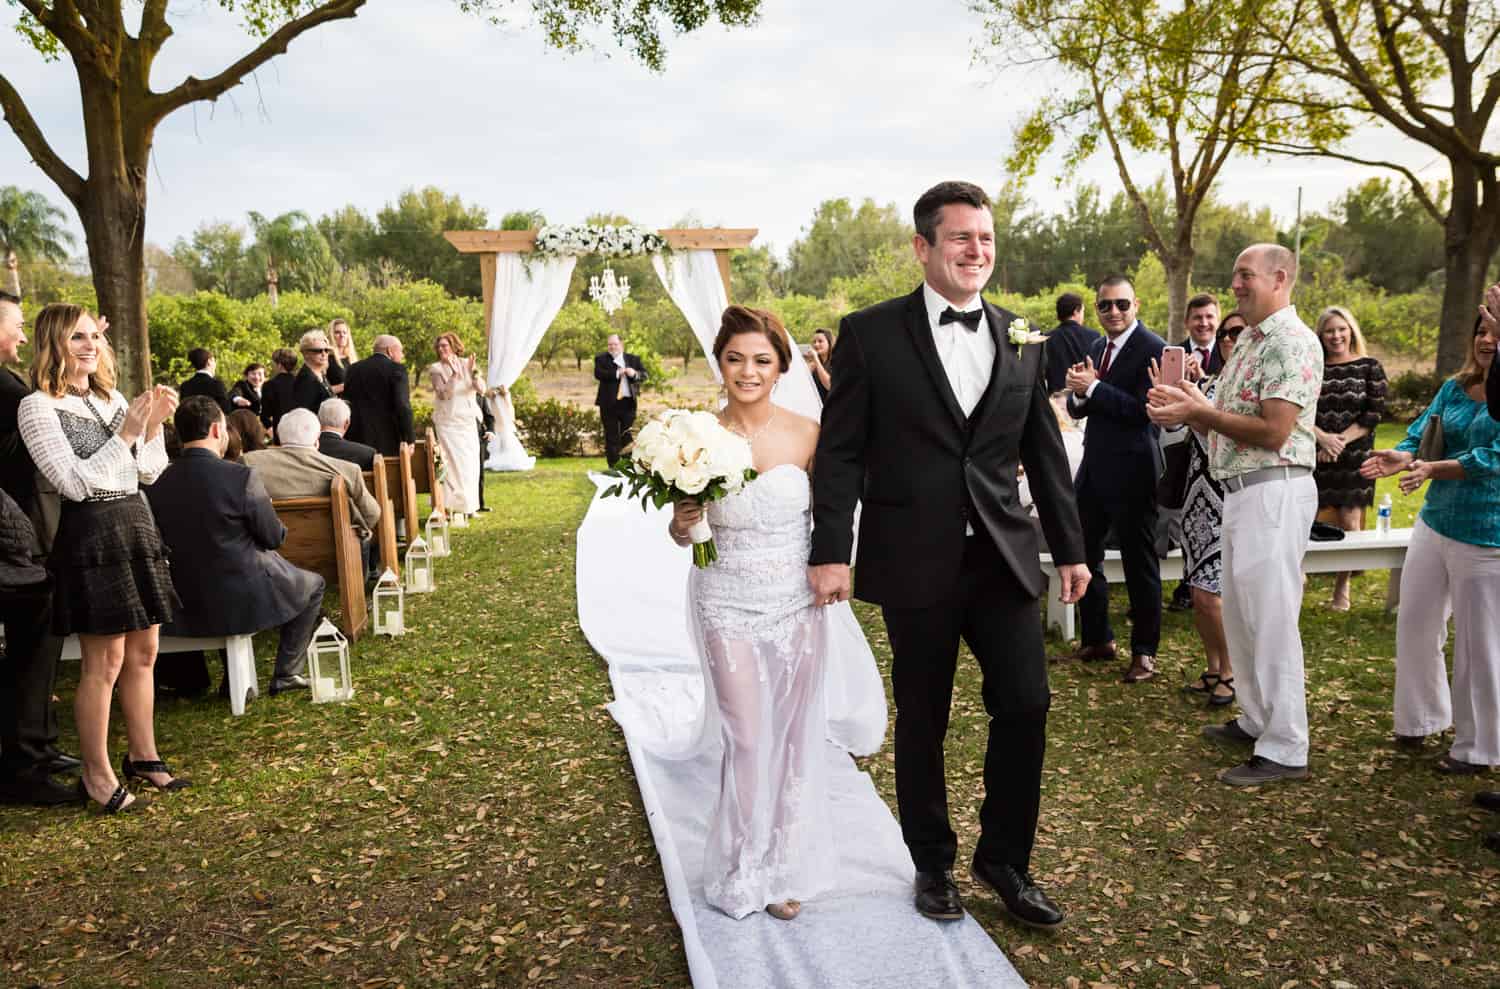 Bride and groom walking down aisle after ceremony for an article on wedding cost cutting tips